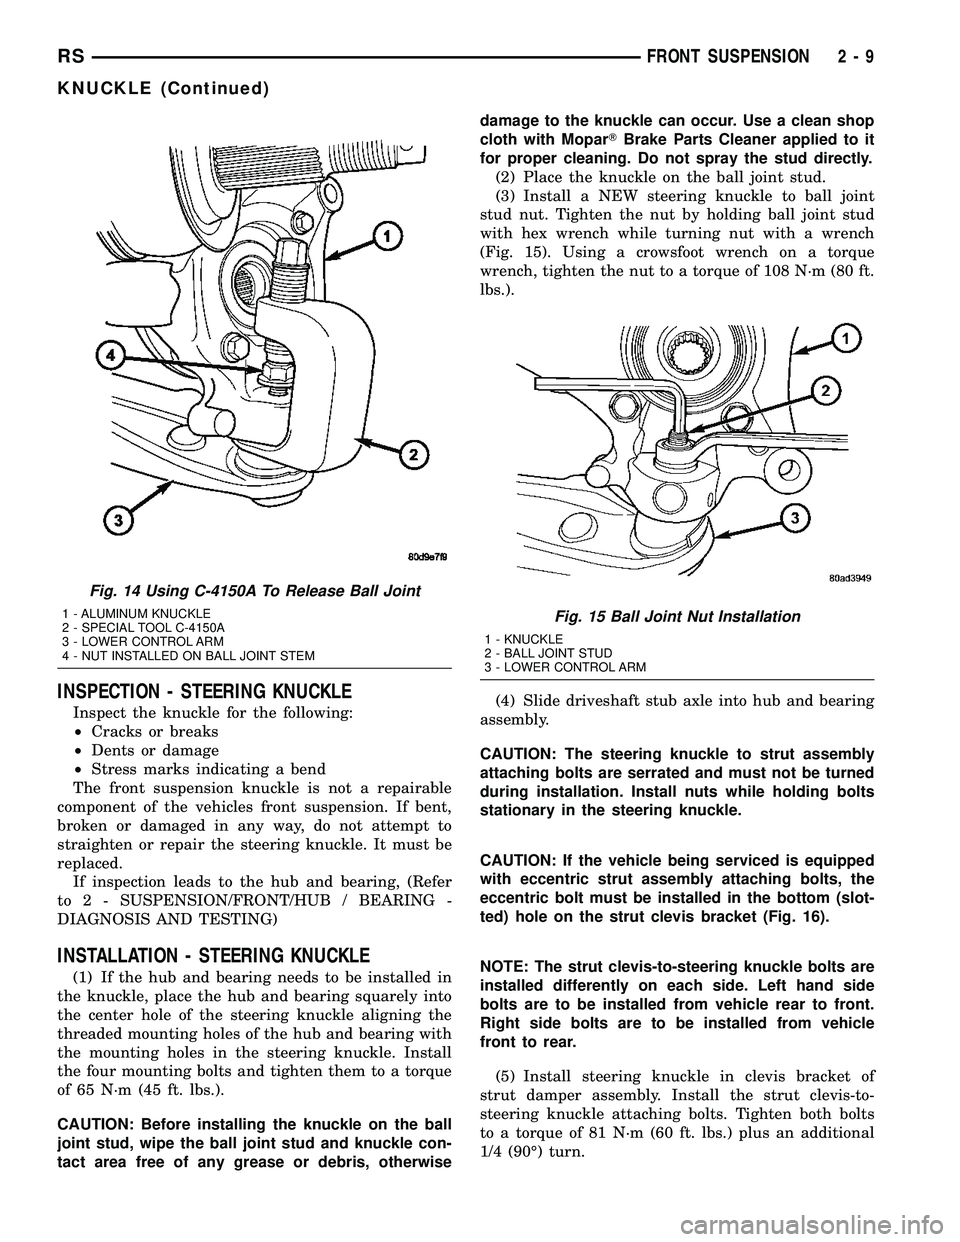 DODGE TOWN AND COUNTRY 2004  Service Manual INSPECTION - STEERING KNUCKLE
Inspect the knuckle for the following:
²Cracks or breaks
²Dents or damage
²Stress marks indicating a bend
The front suspension knuckle is not a repairable
component of